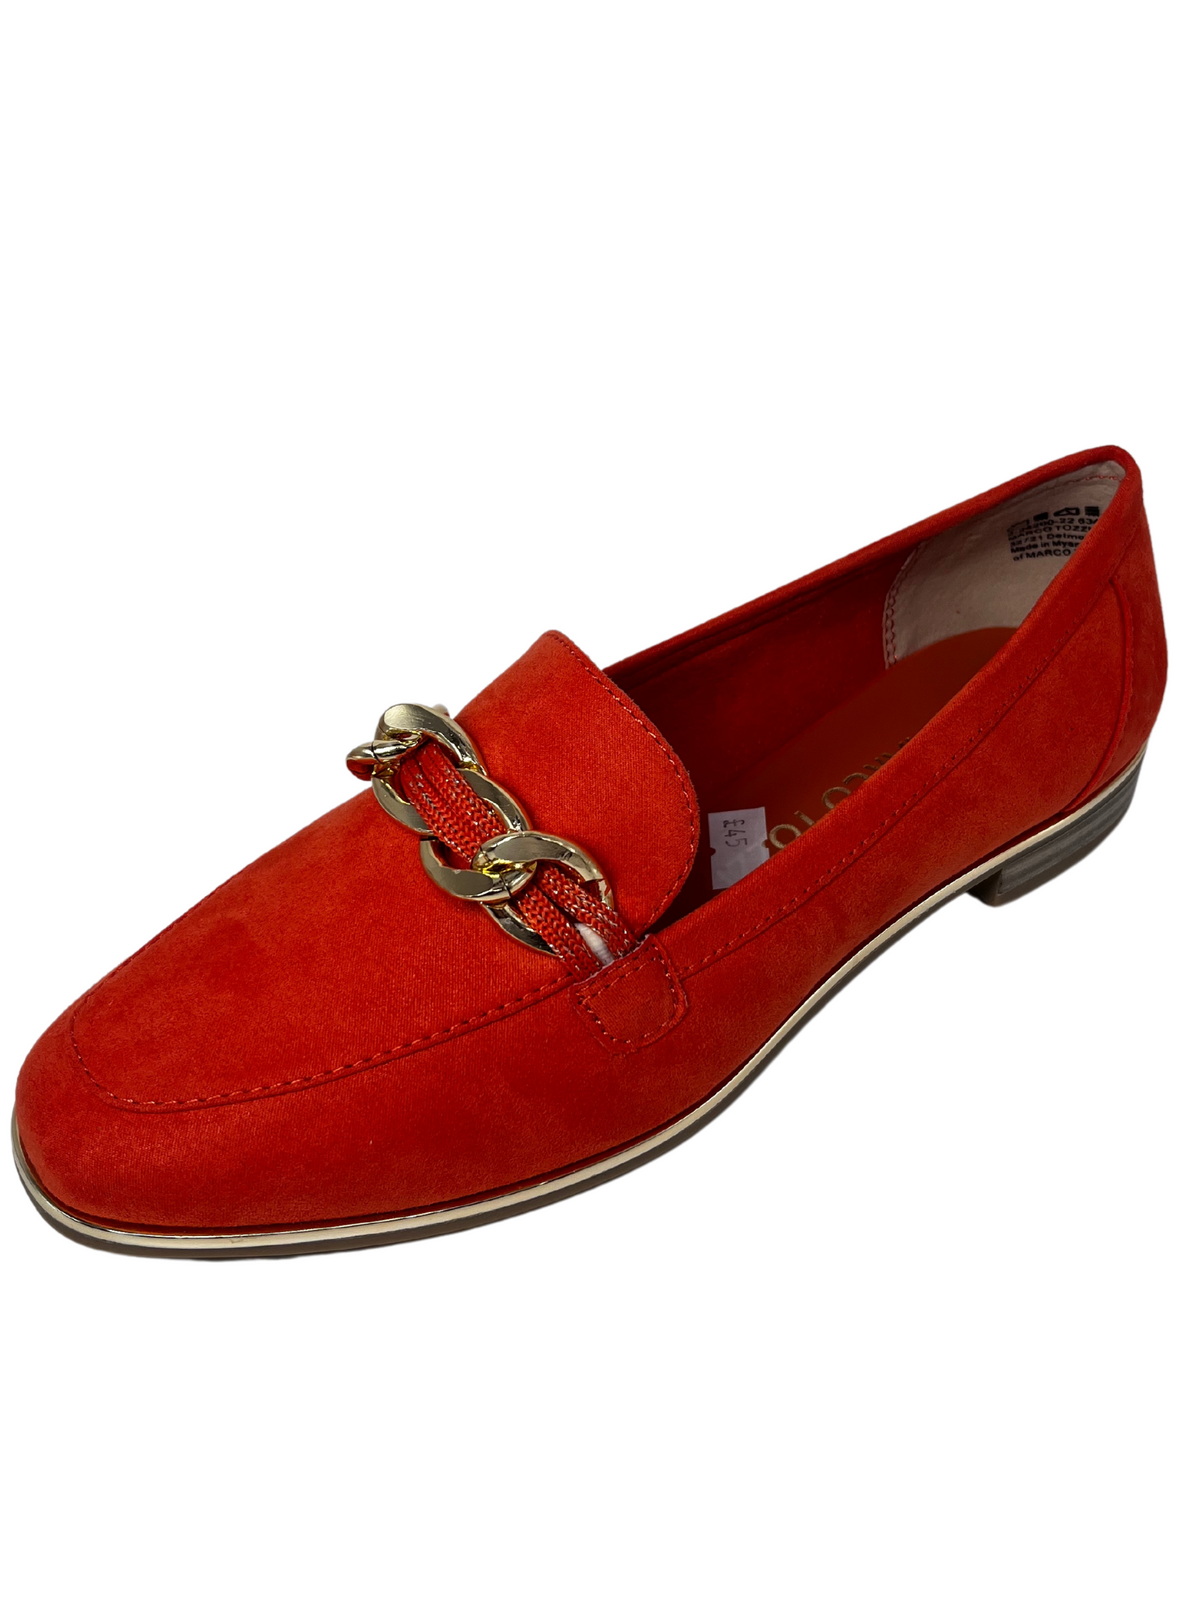 Marco Tozzi Orange Loafers With Chain Detail